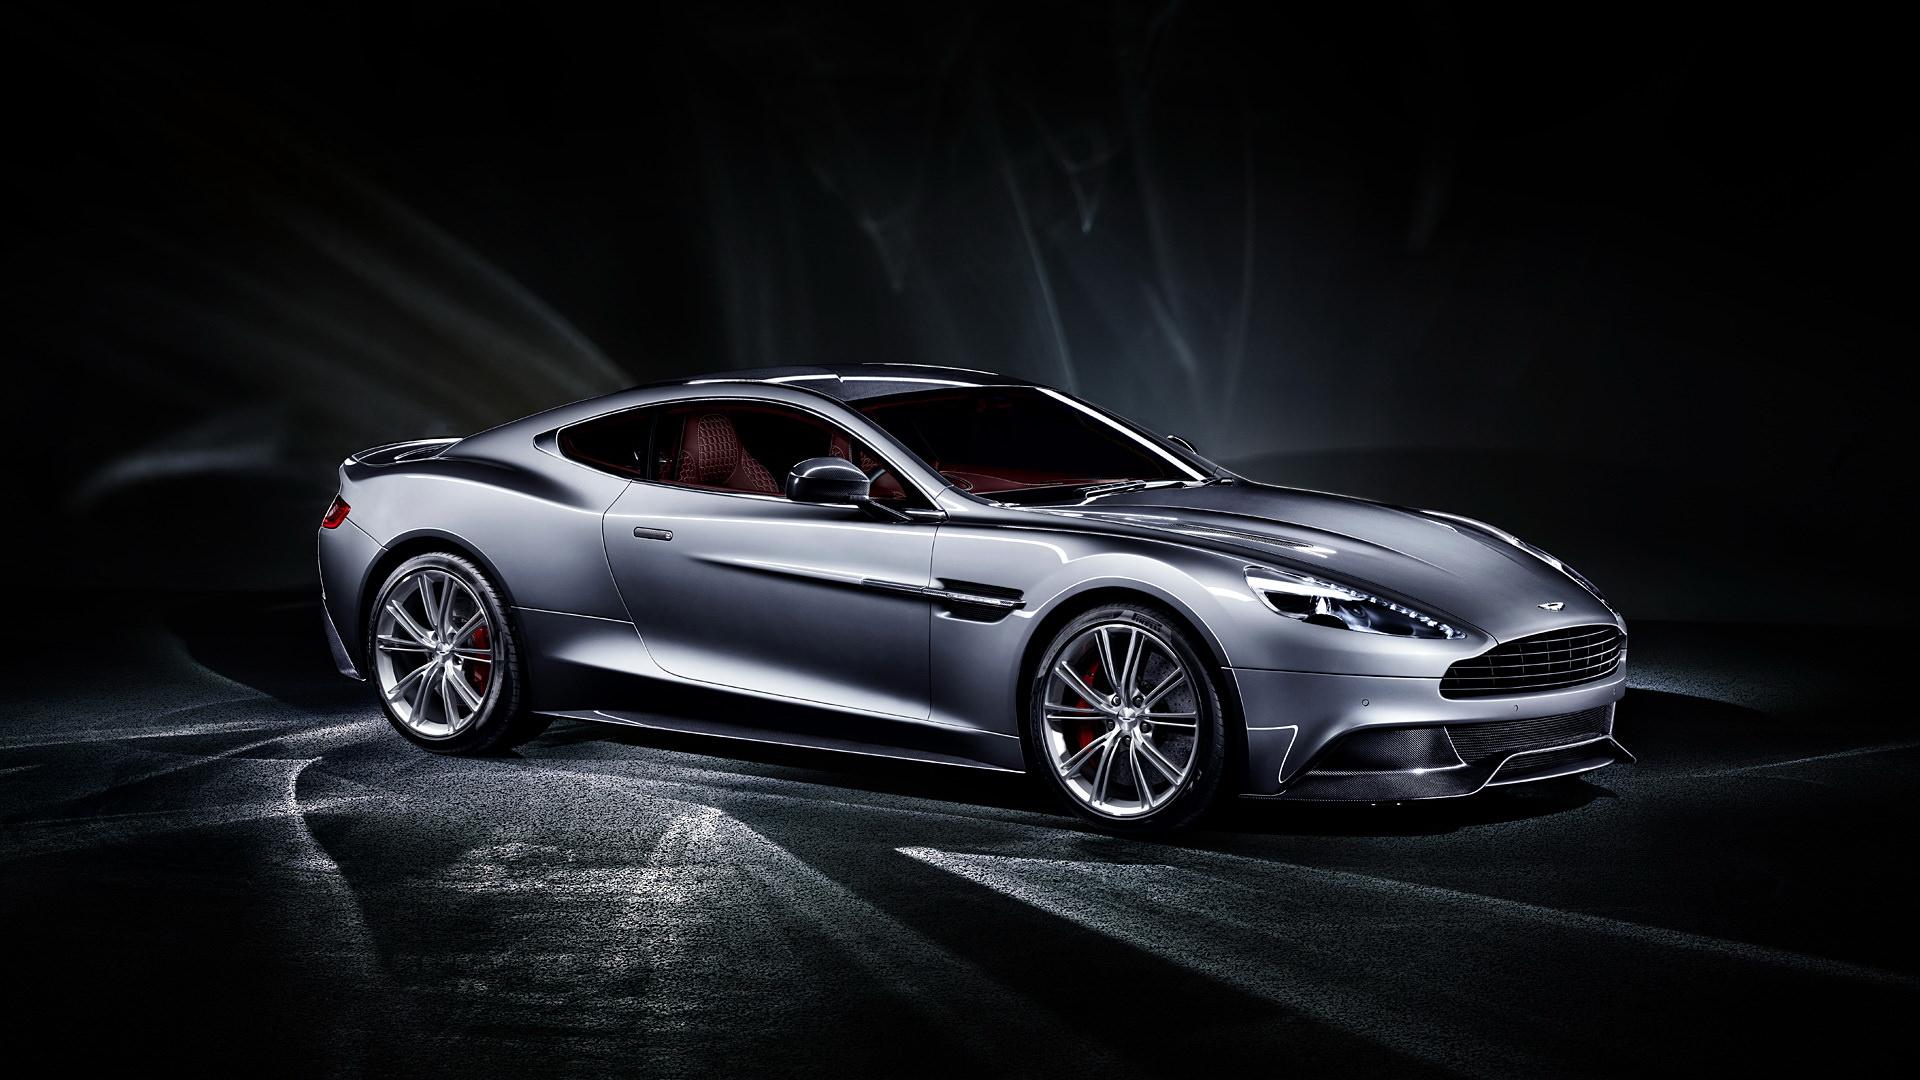 Cool Red Aston Martin Vanquish Wallpaper Wides. Car Picture